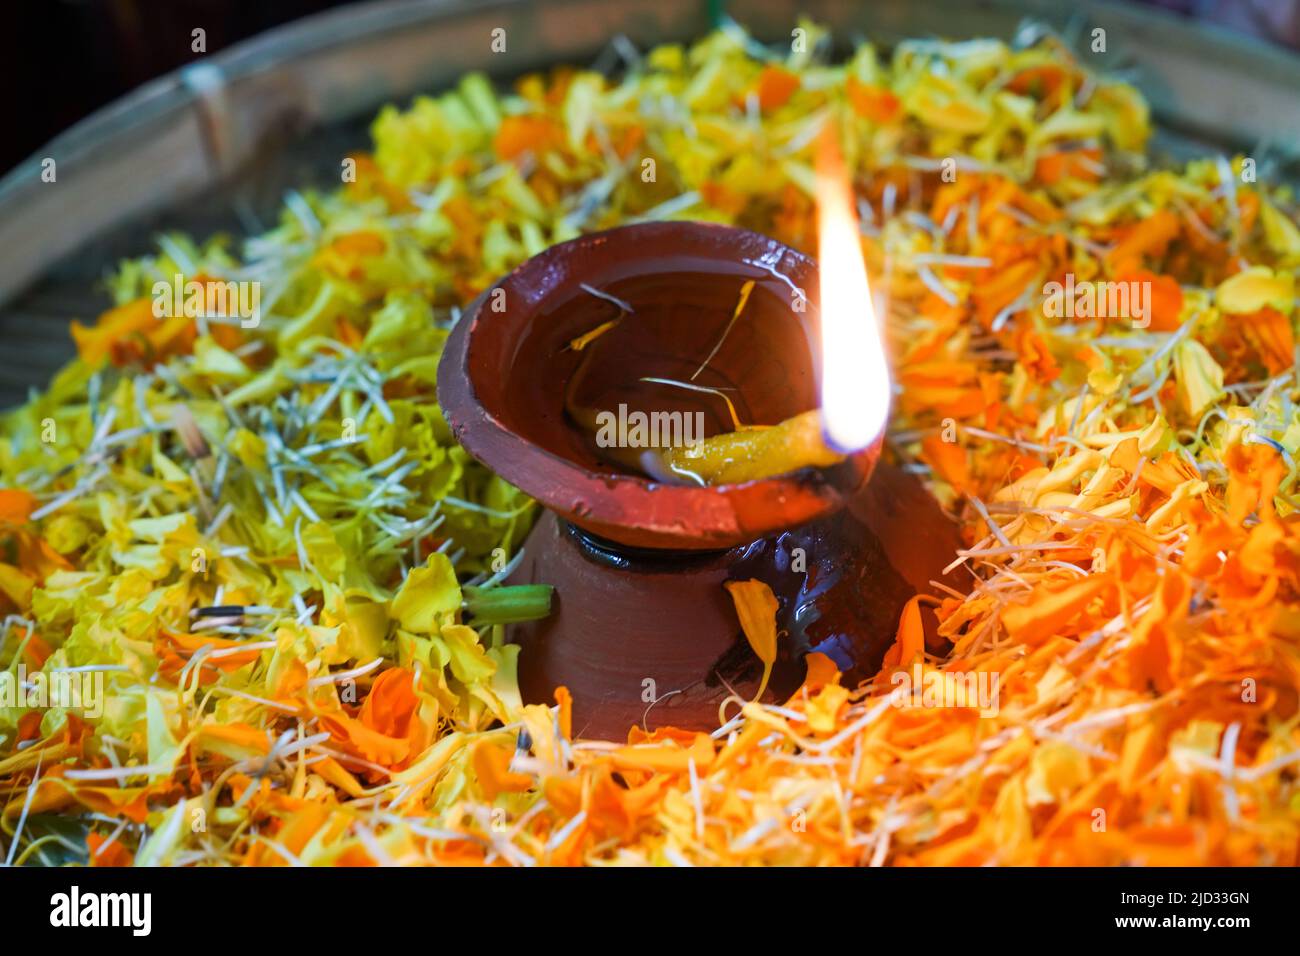 Flame in an oil lamp amidst a bowl of flowers, welcoming ceremony in an Indian ashram Stock Photo